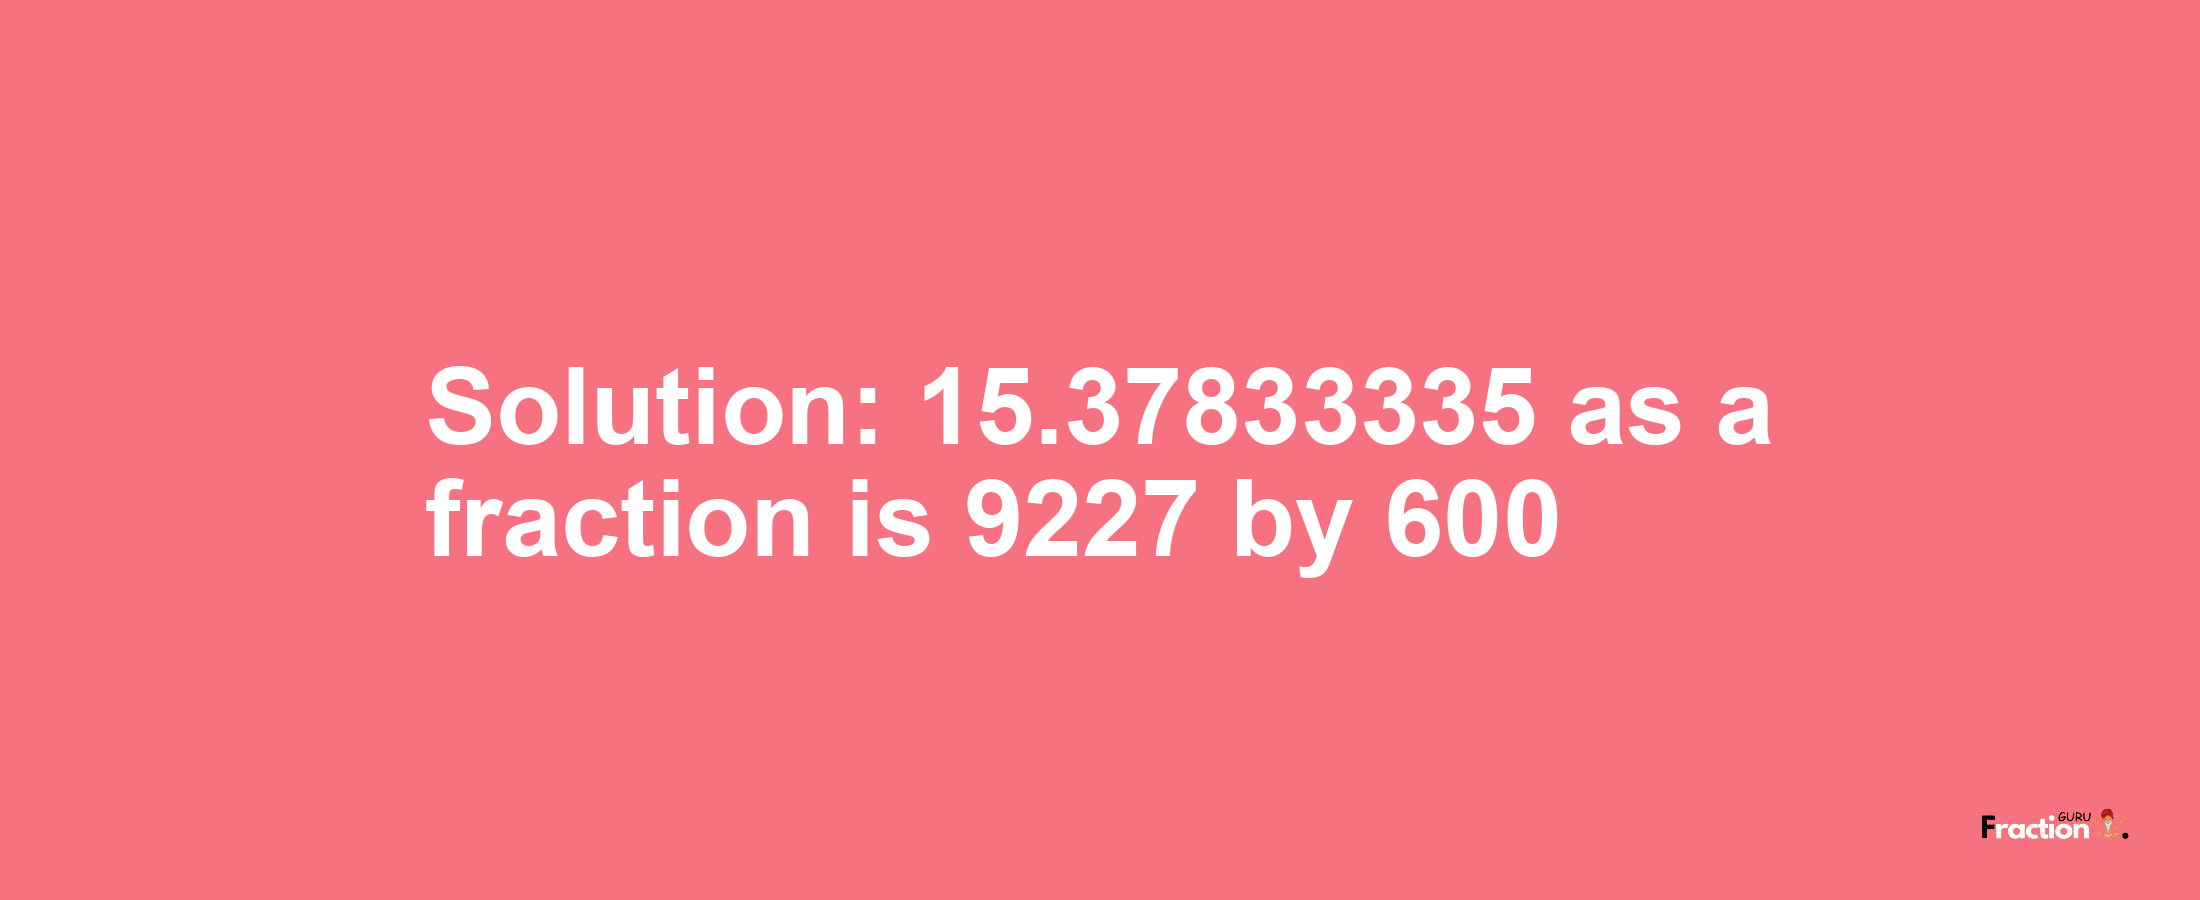 Solution:15.37833335 as a fraction is 9227/600